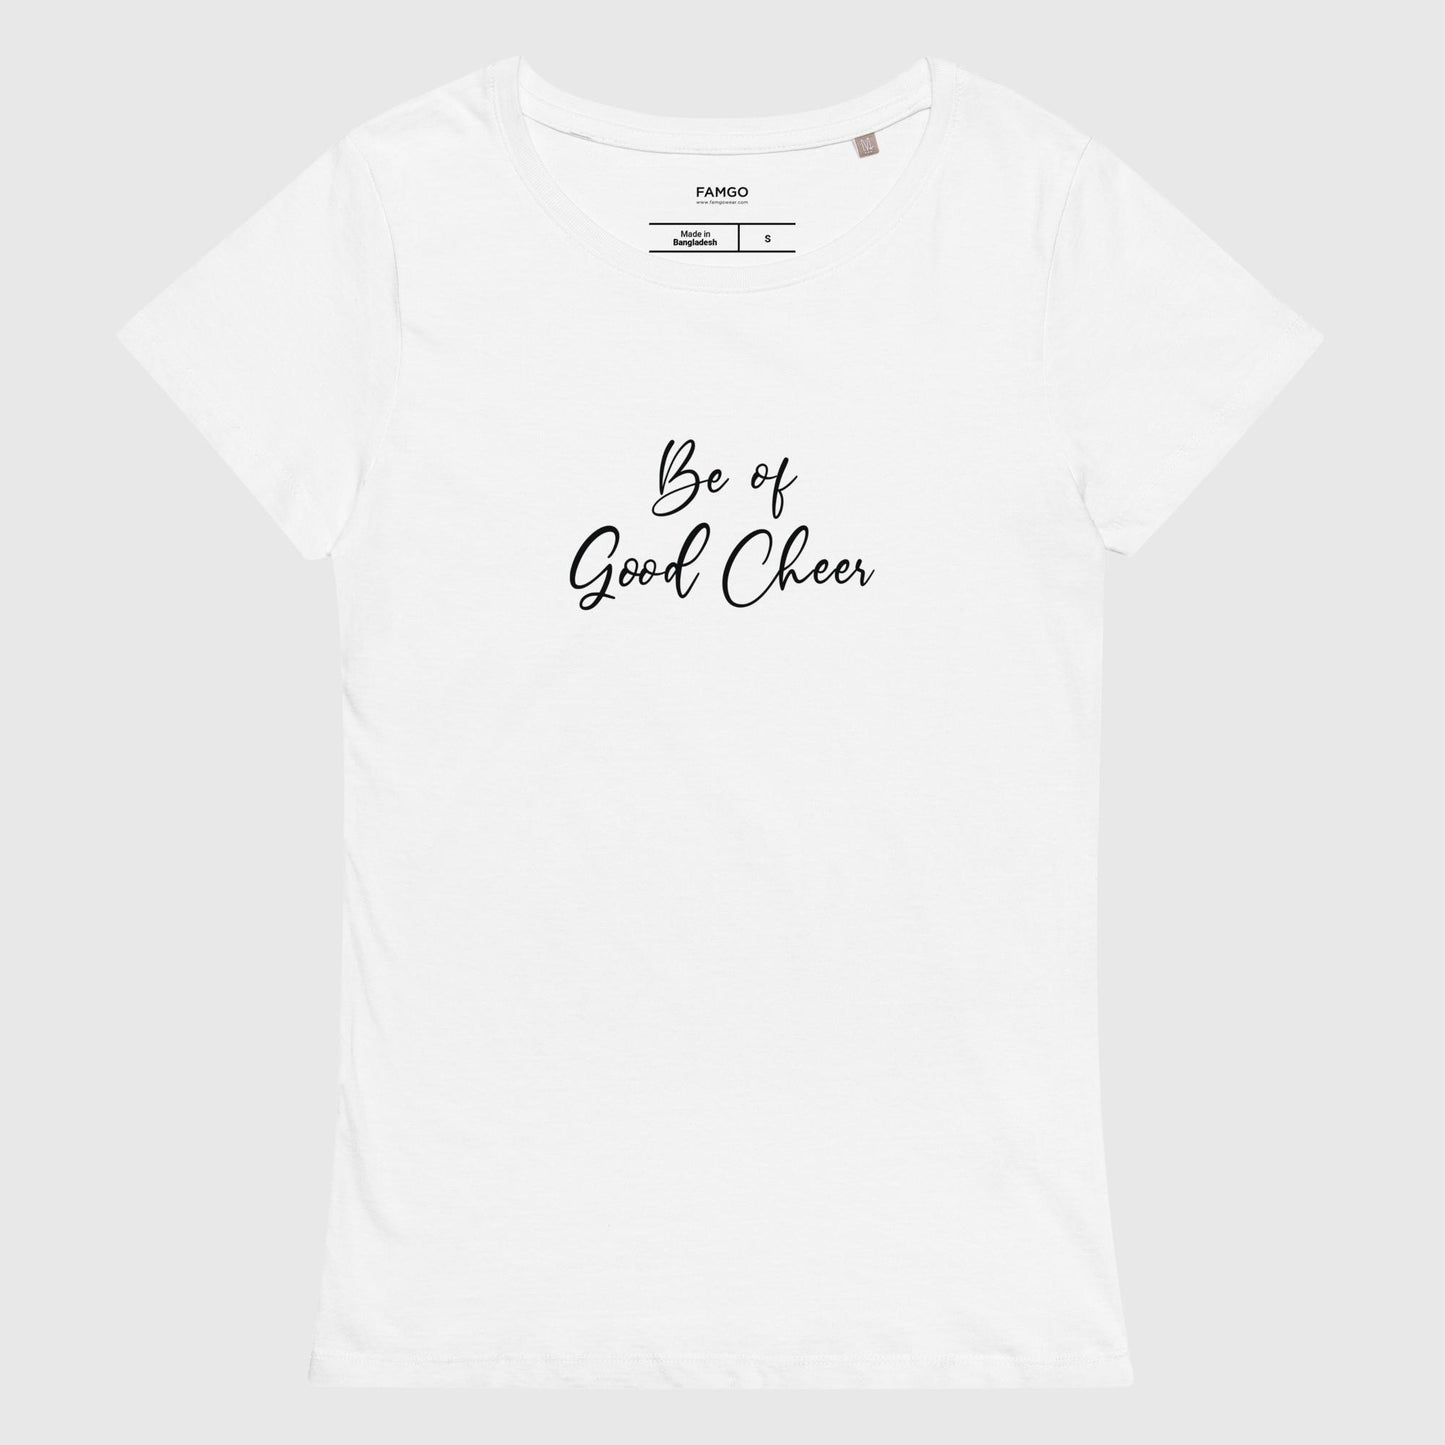 Women's white organic cotton t-shirt that features the positive quote, "Be of Good Cheer."